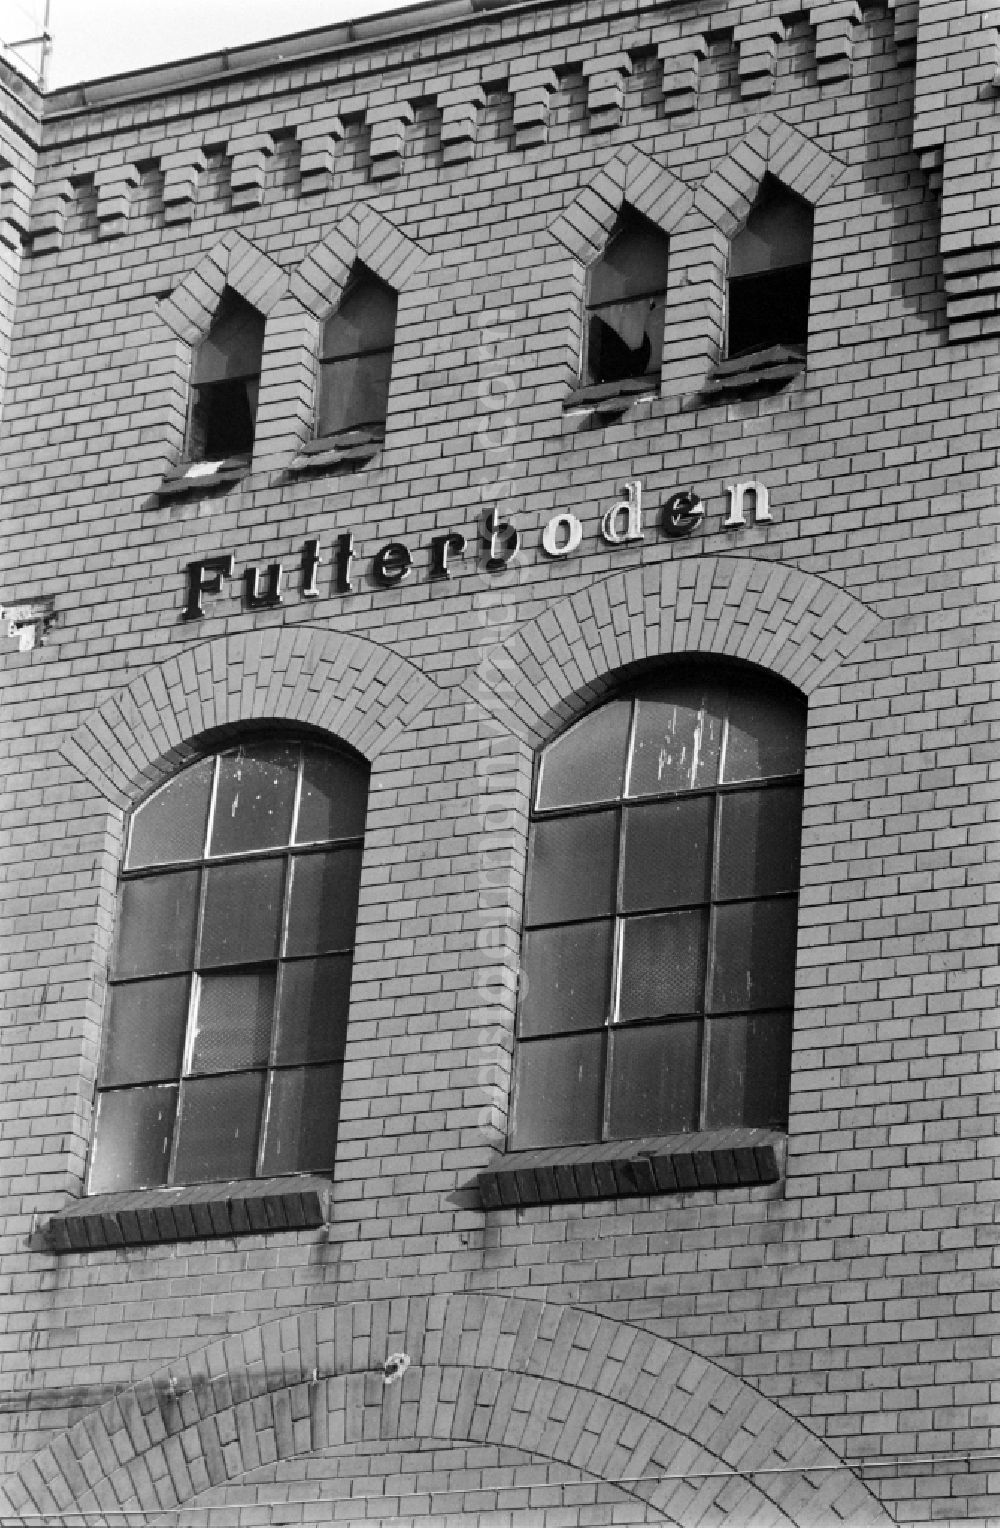 GDR image archive: Berlin - View of the building complex taken over by the Treuhandanstalt of the VEB Schultheiss brewery Schoenhauser Allee after founding the KulturBrauerei gGmbH in Berlin - Prenzlauer Berg, the former capital of the GDR, German Democratic Republic